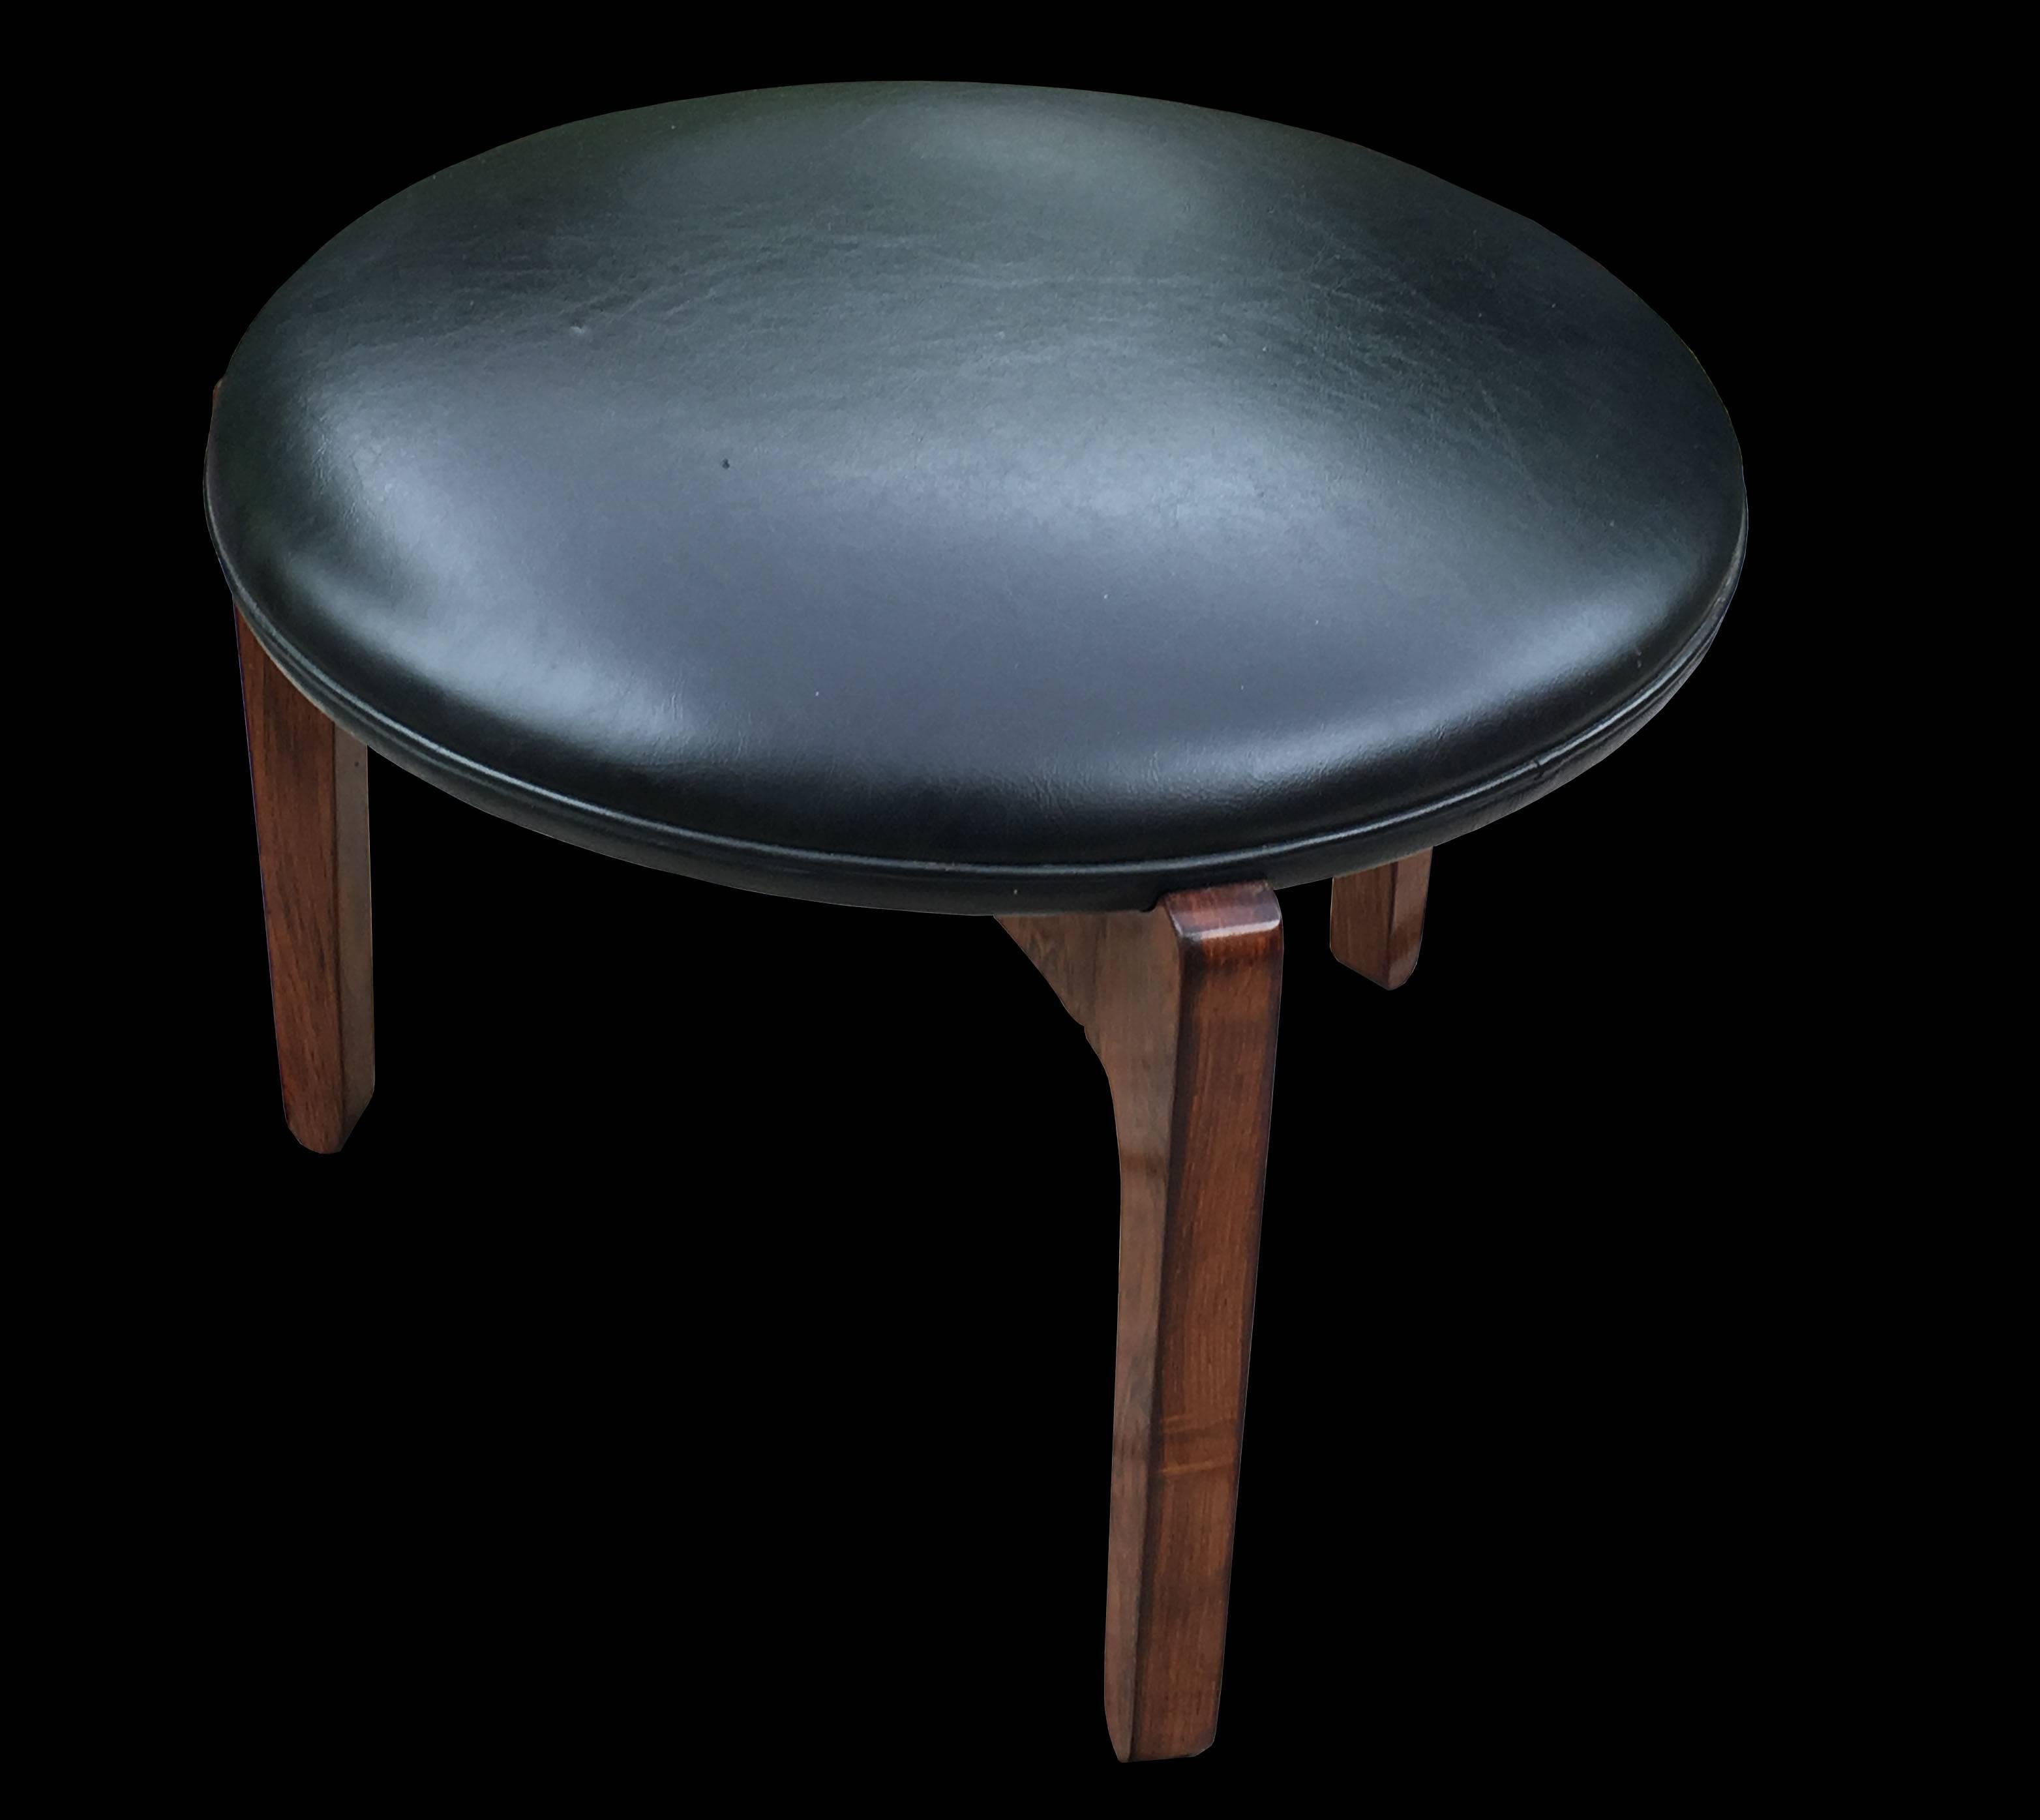 A very clean example of this scarce stool designed by Sven Ellekaer and made from very nice rosewood and black leather cloth.